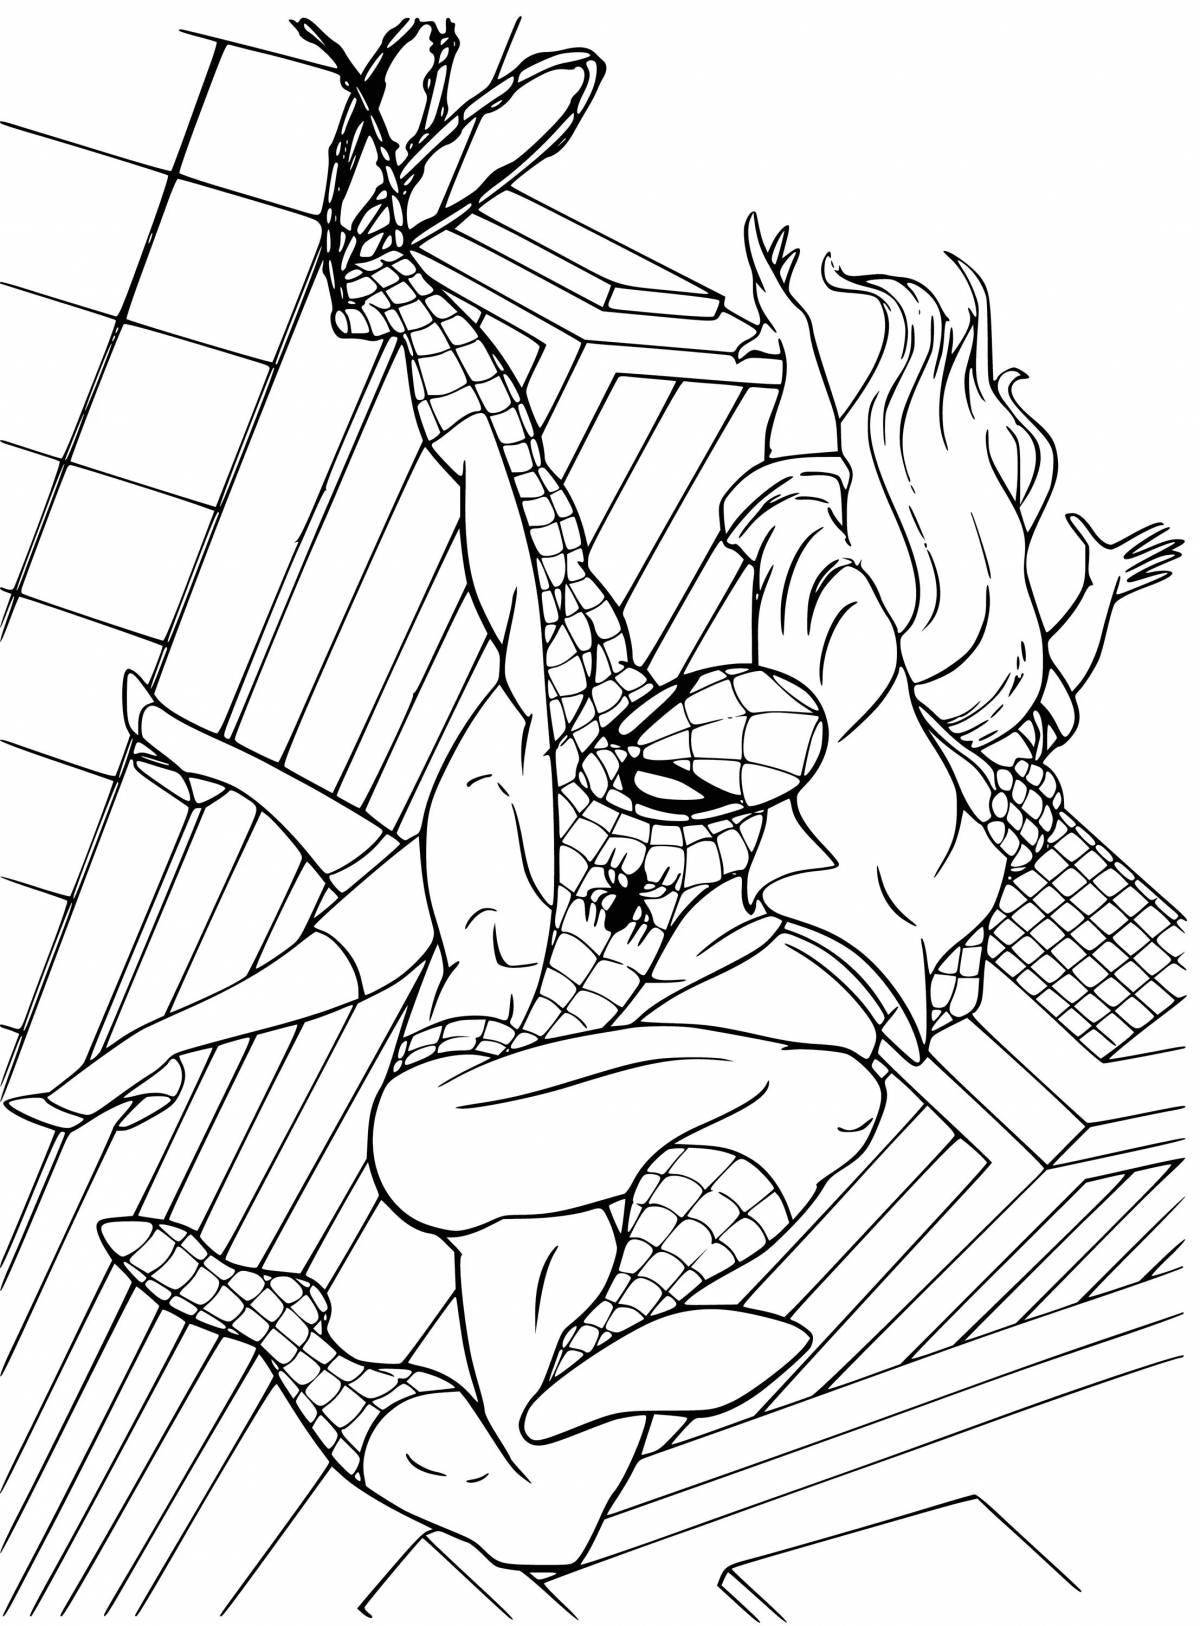 Spiderman's amazing ghost coloring page